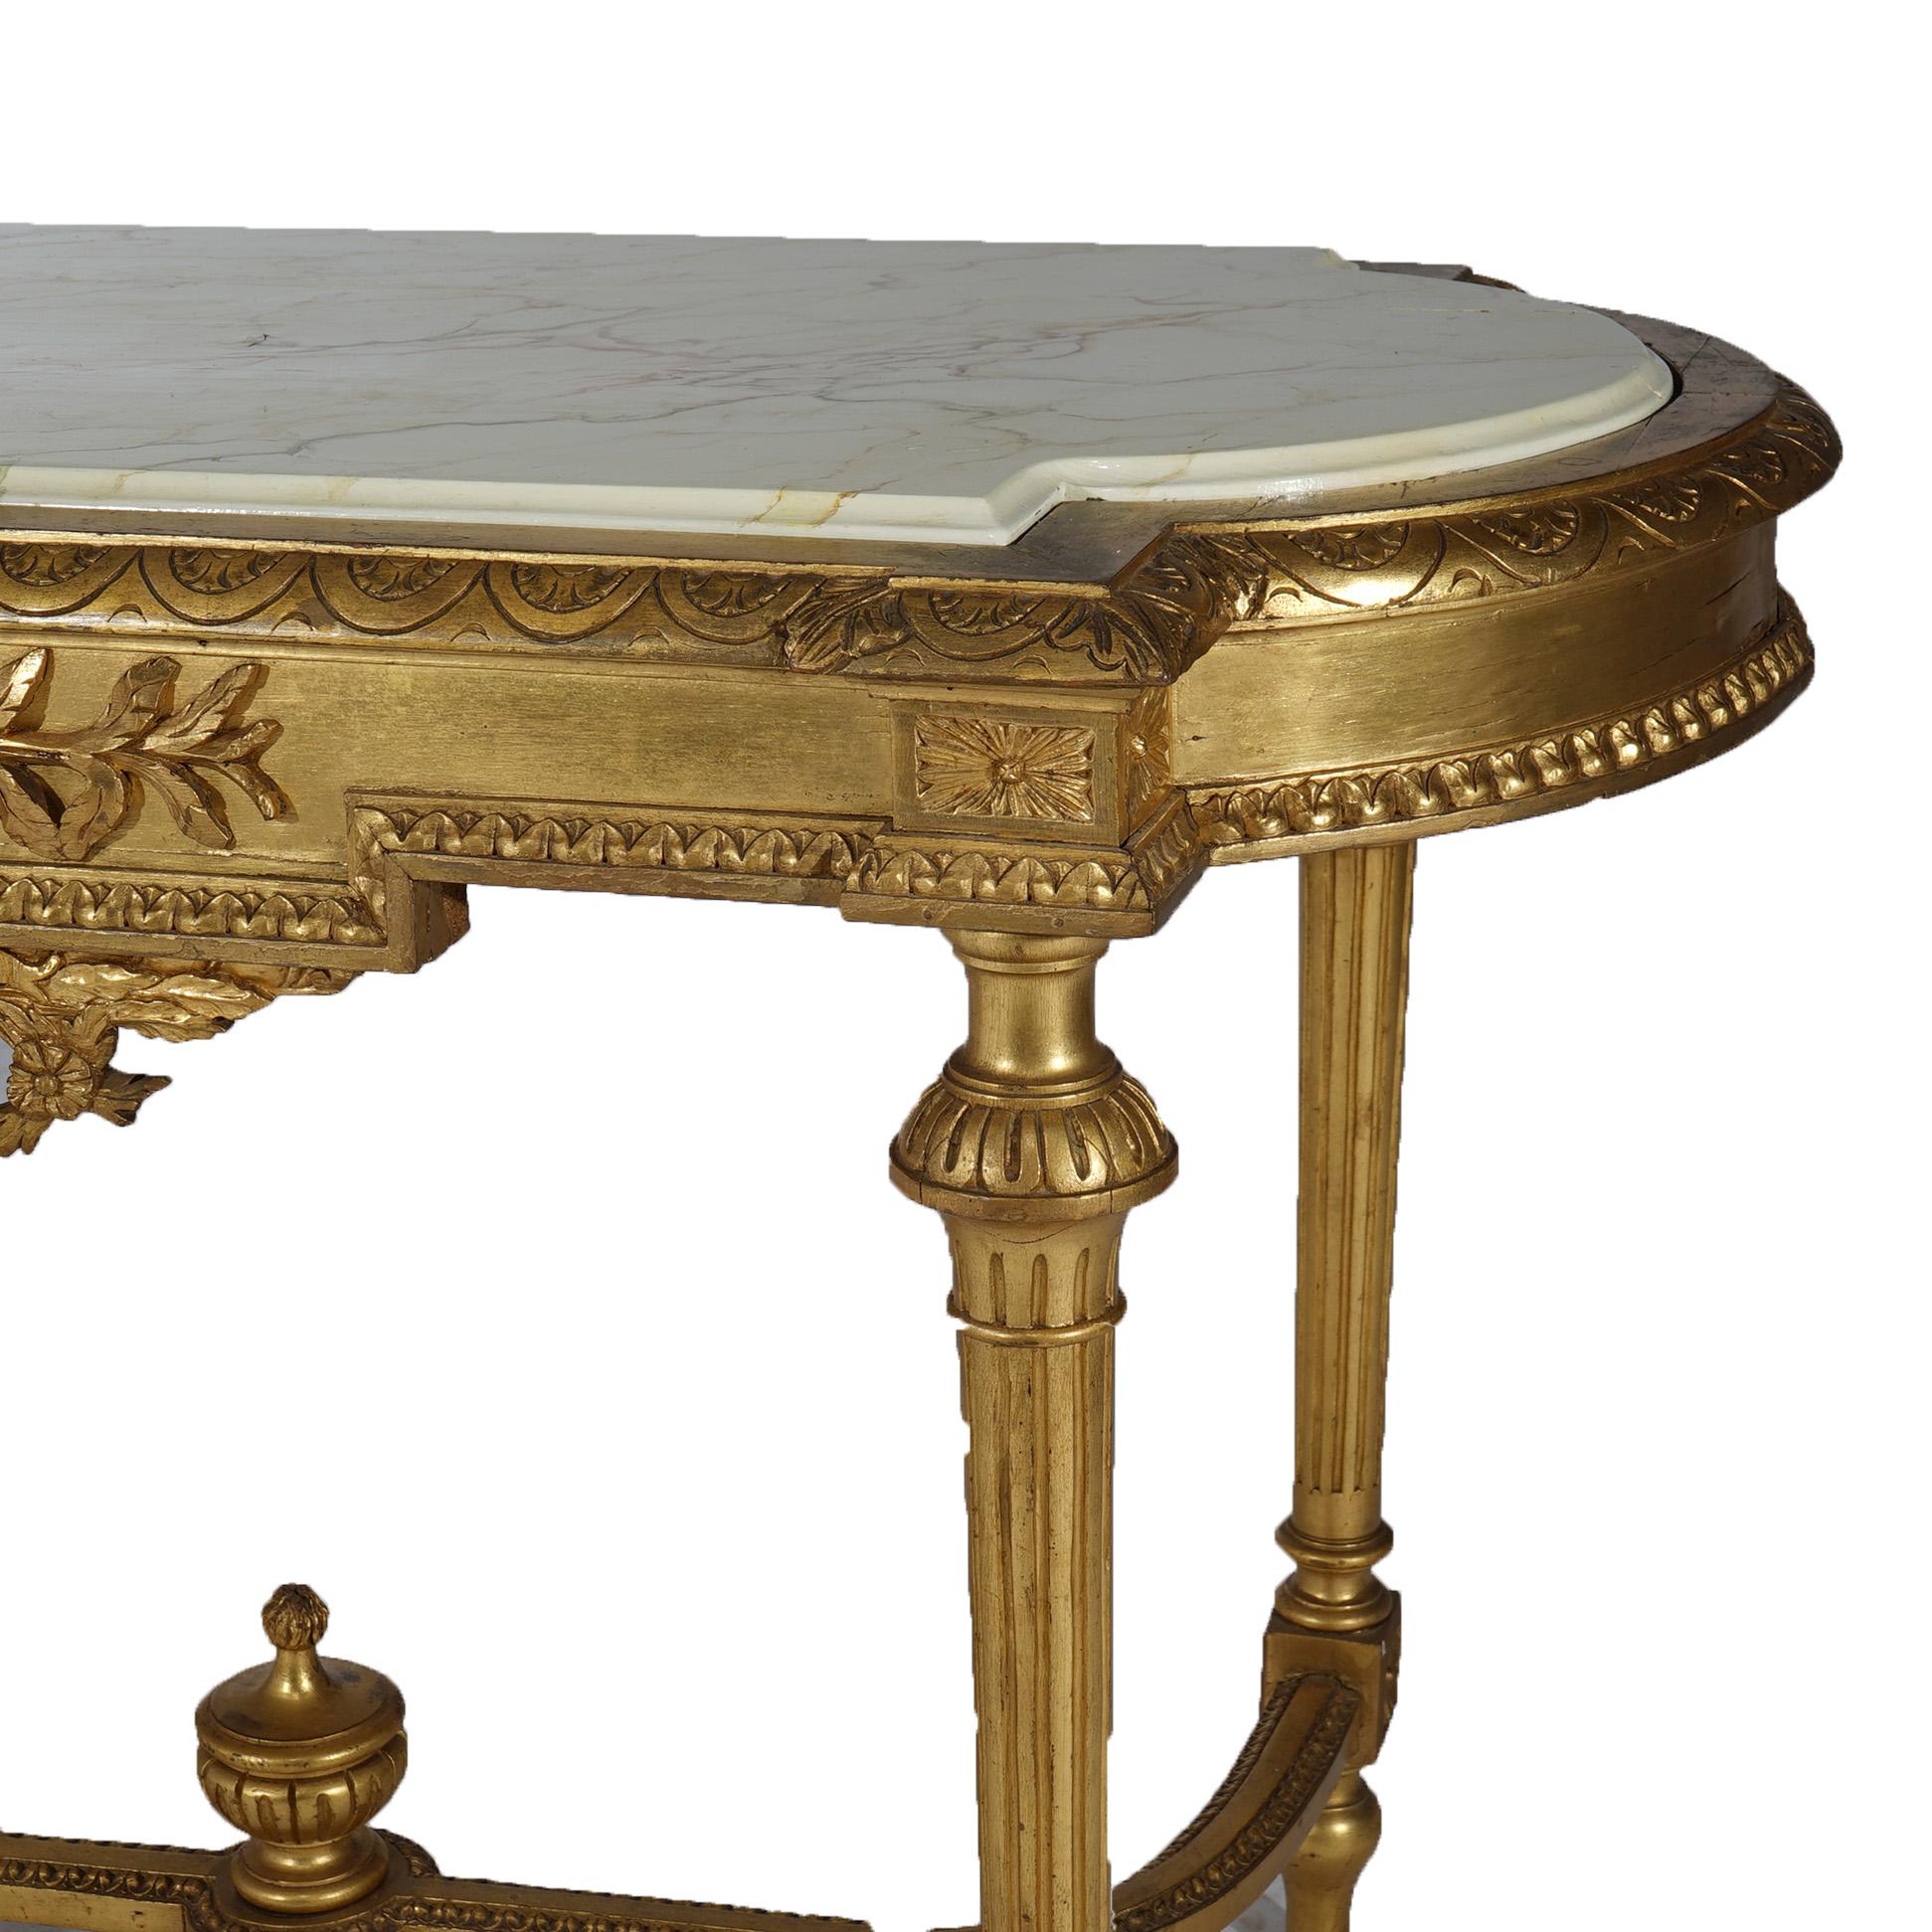 Antique French Louis XVI Style Giltwood Parlor Table with Faux Painted Top 19thC 16